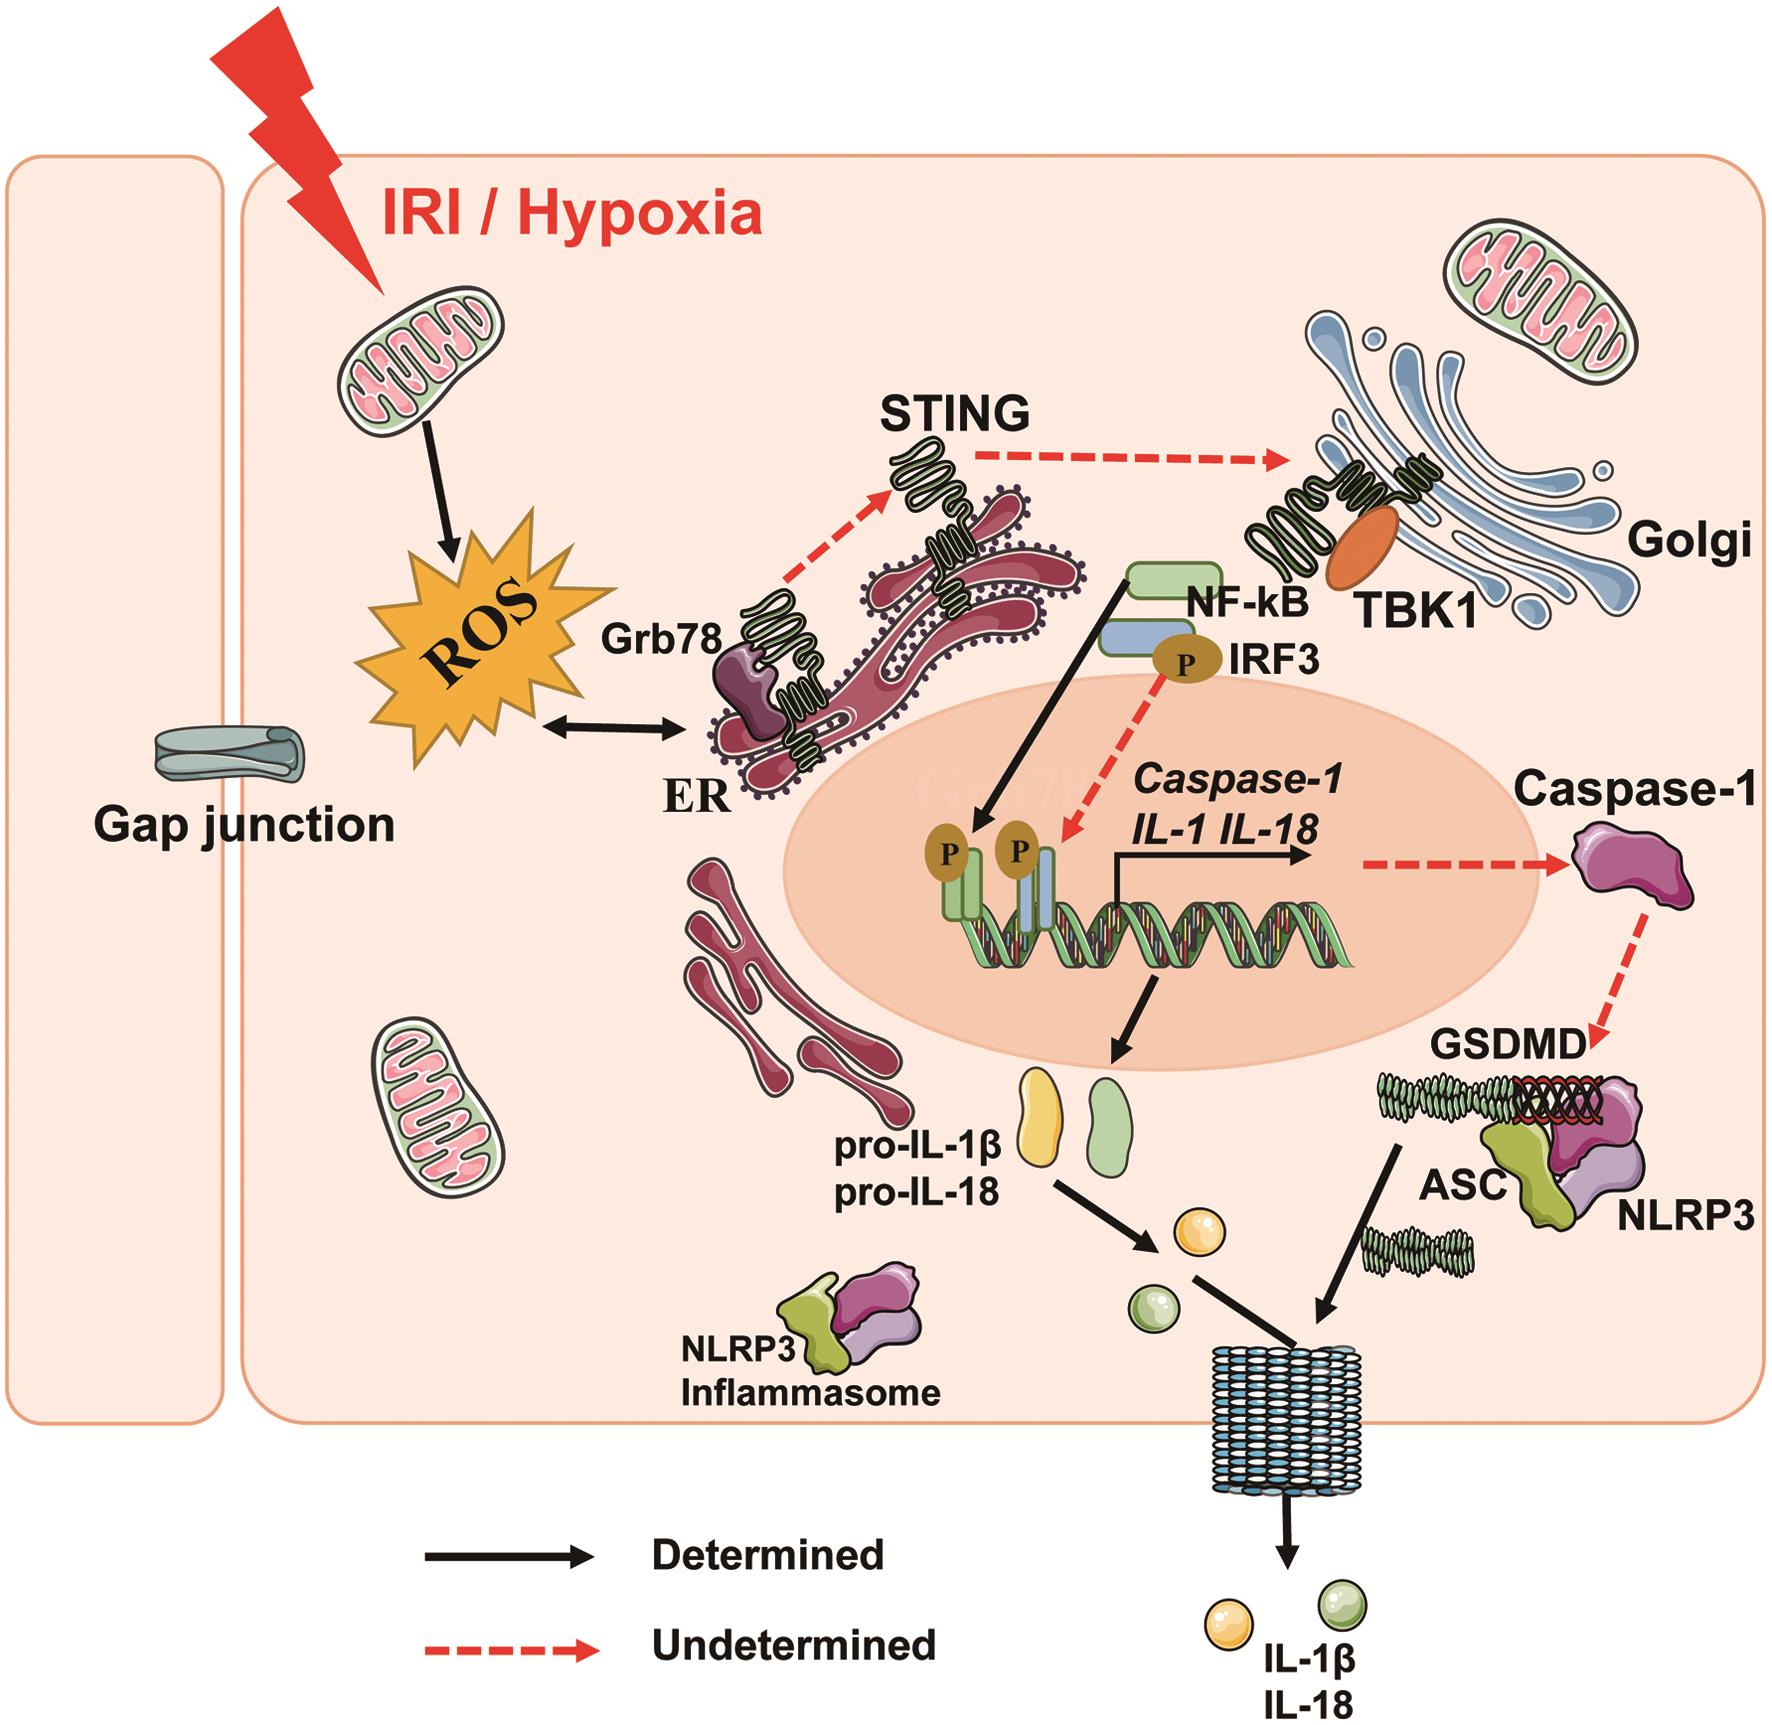 Schematic model of the role of ER stress and STING/IRF3 in pyroptosis in myocardial I/R injury.